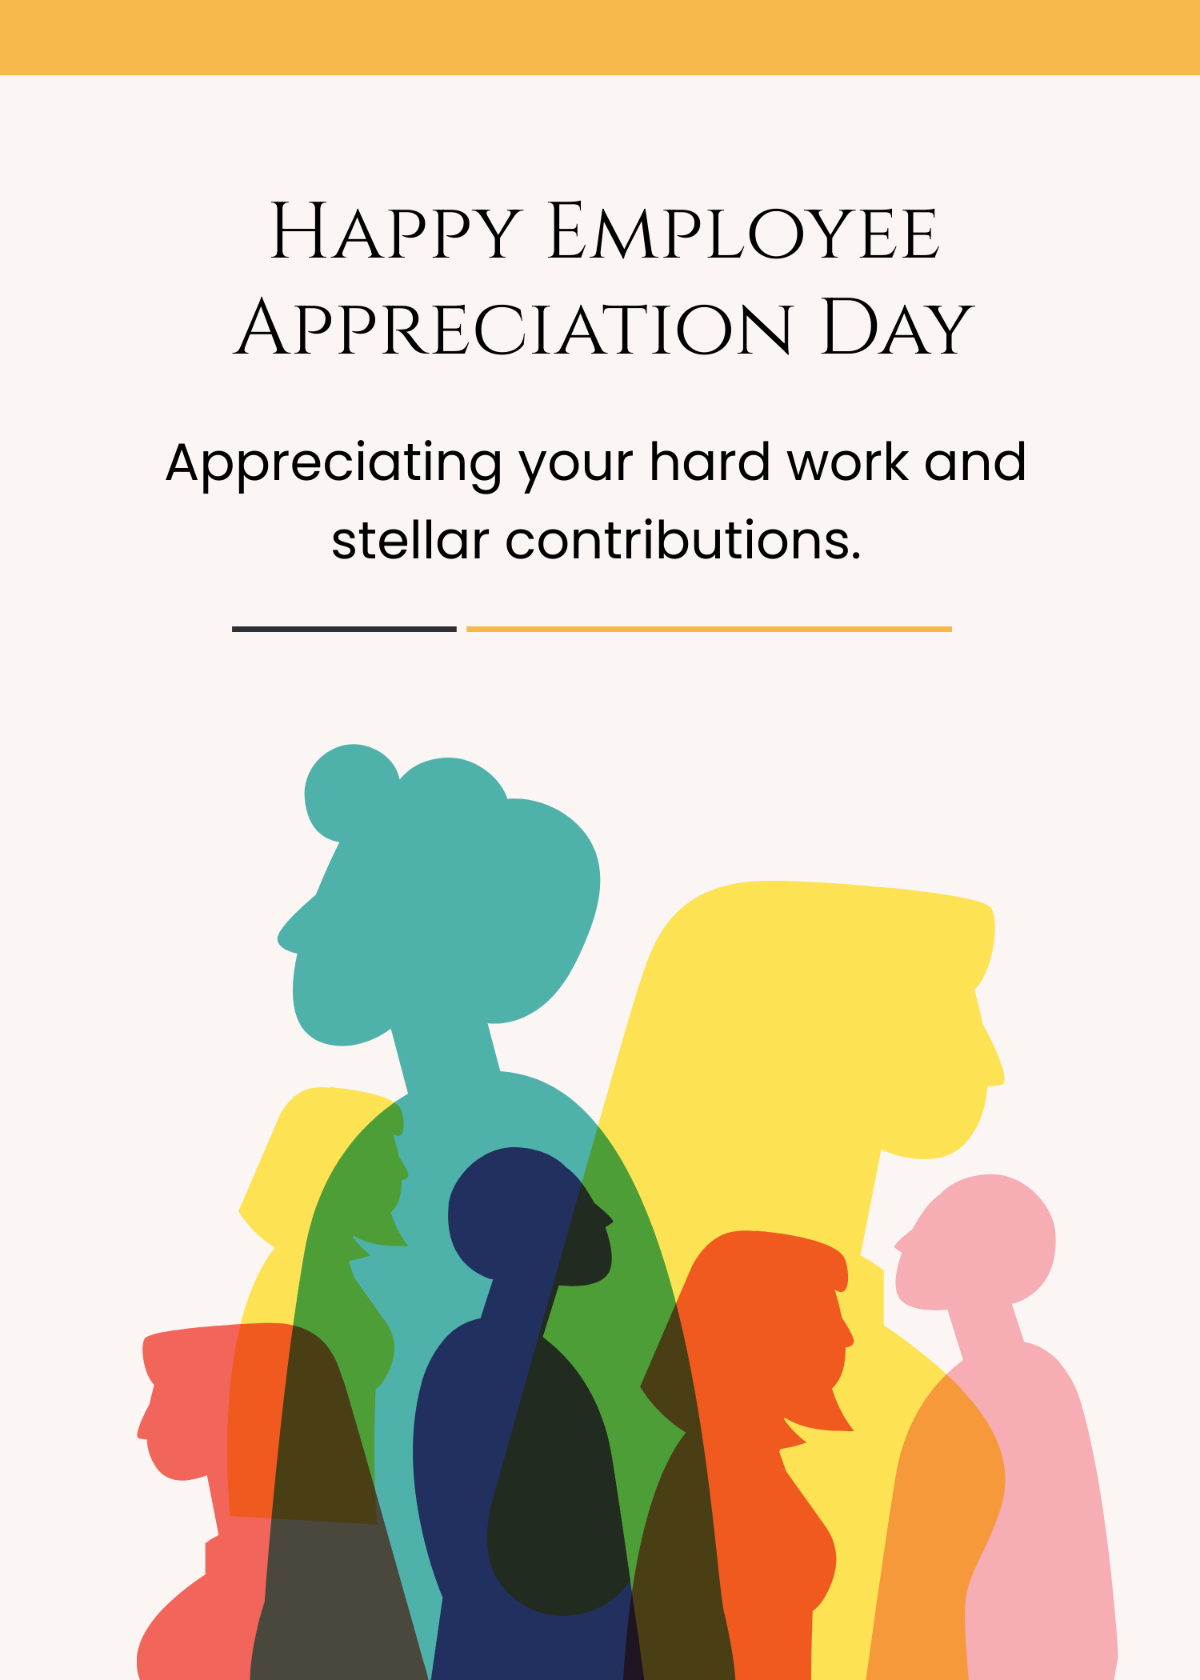 Global Employee Appreciation Day Greeting Card Template